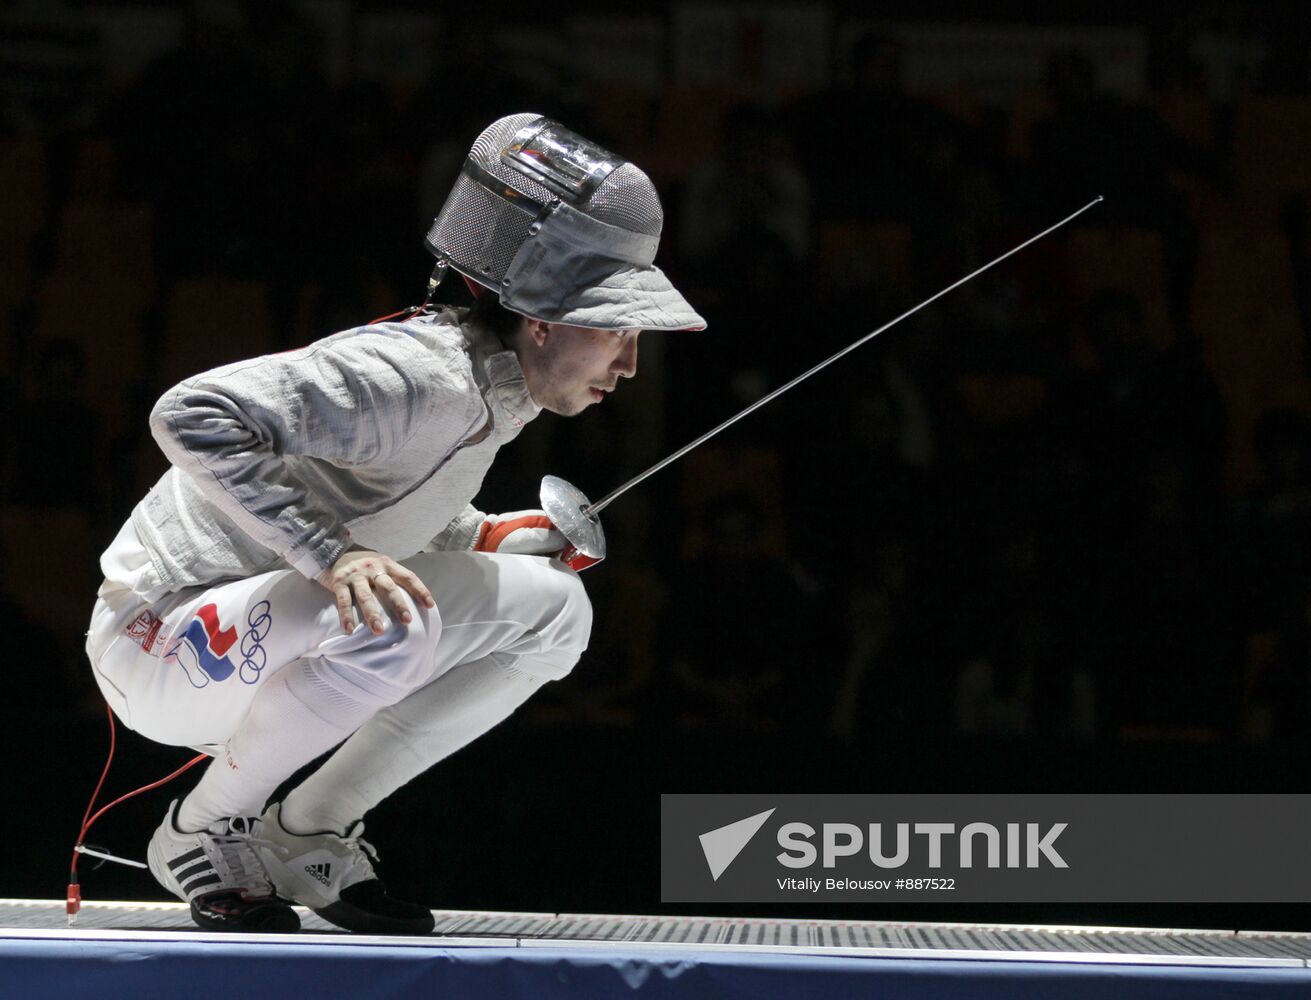 2011 Moscow Saber World Fencing Tournament